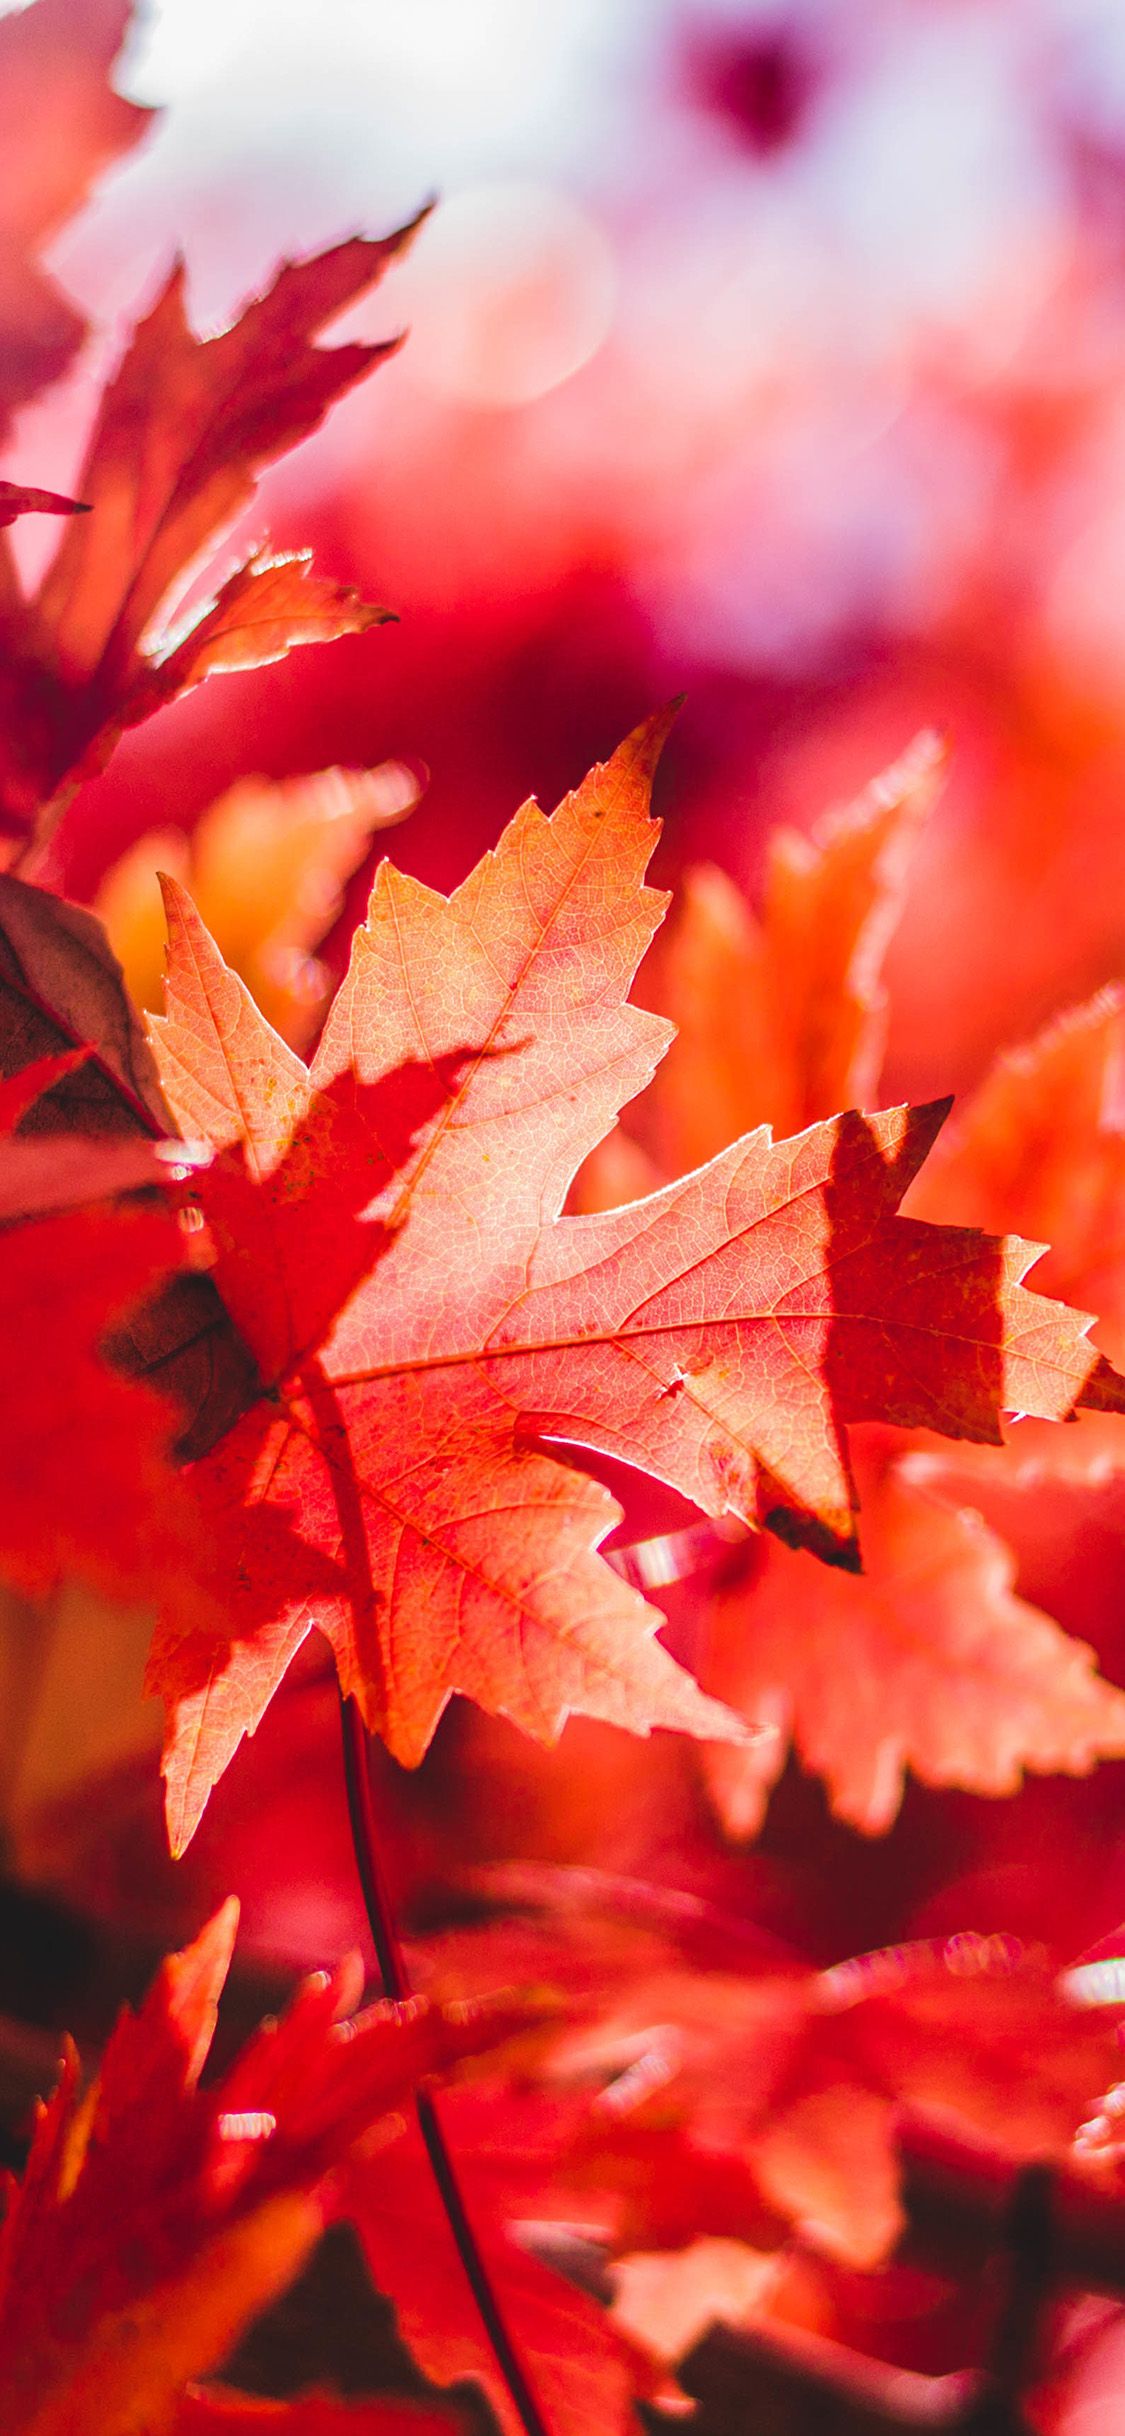 Maple Leaf Flower Red Fall Autumn Nature Via For IPhone X. Autumn Nature, Fall Wallpaper, Trendy Flowers